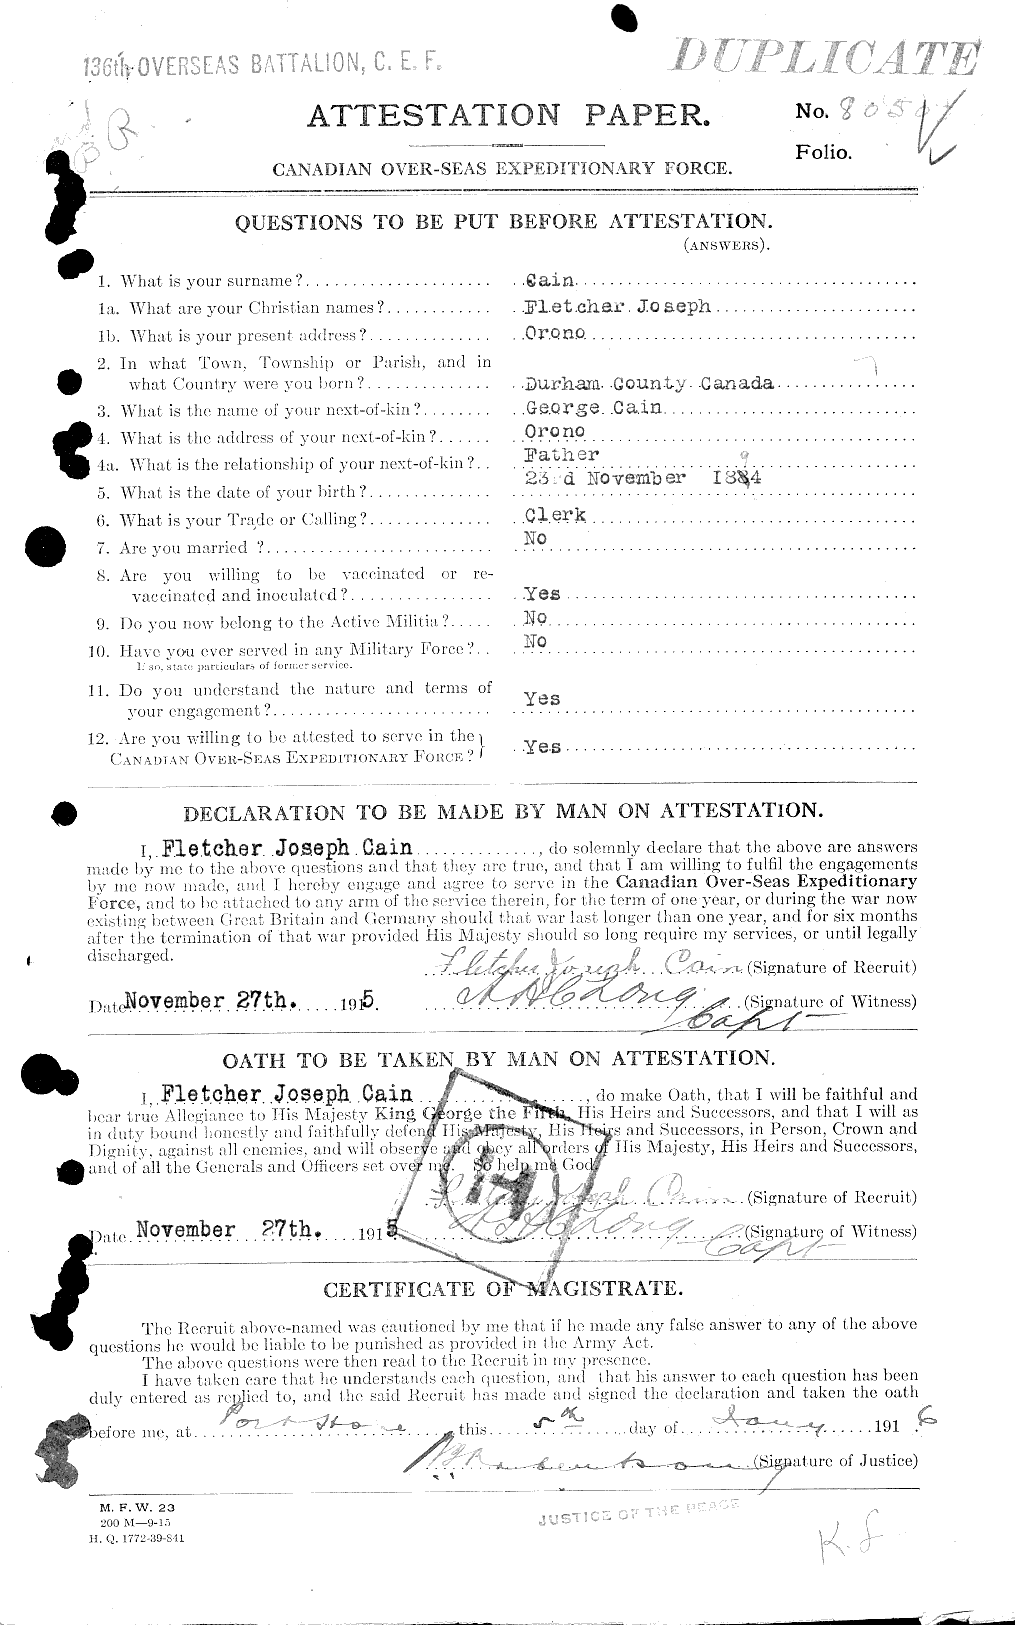 Personnel Records of the First World War - CEF 001712a